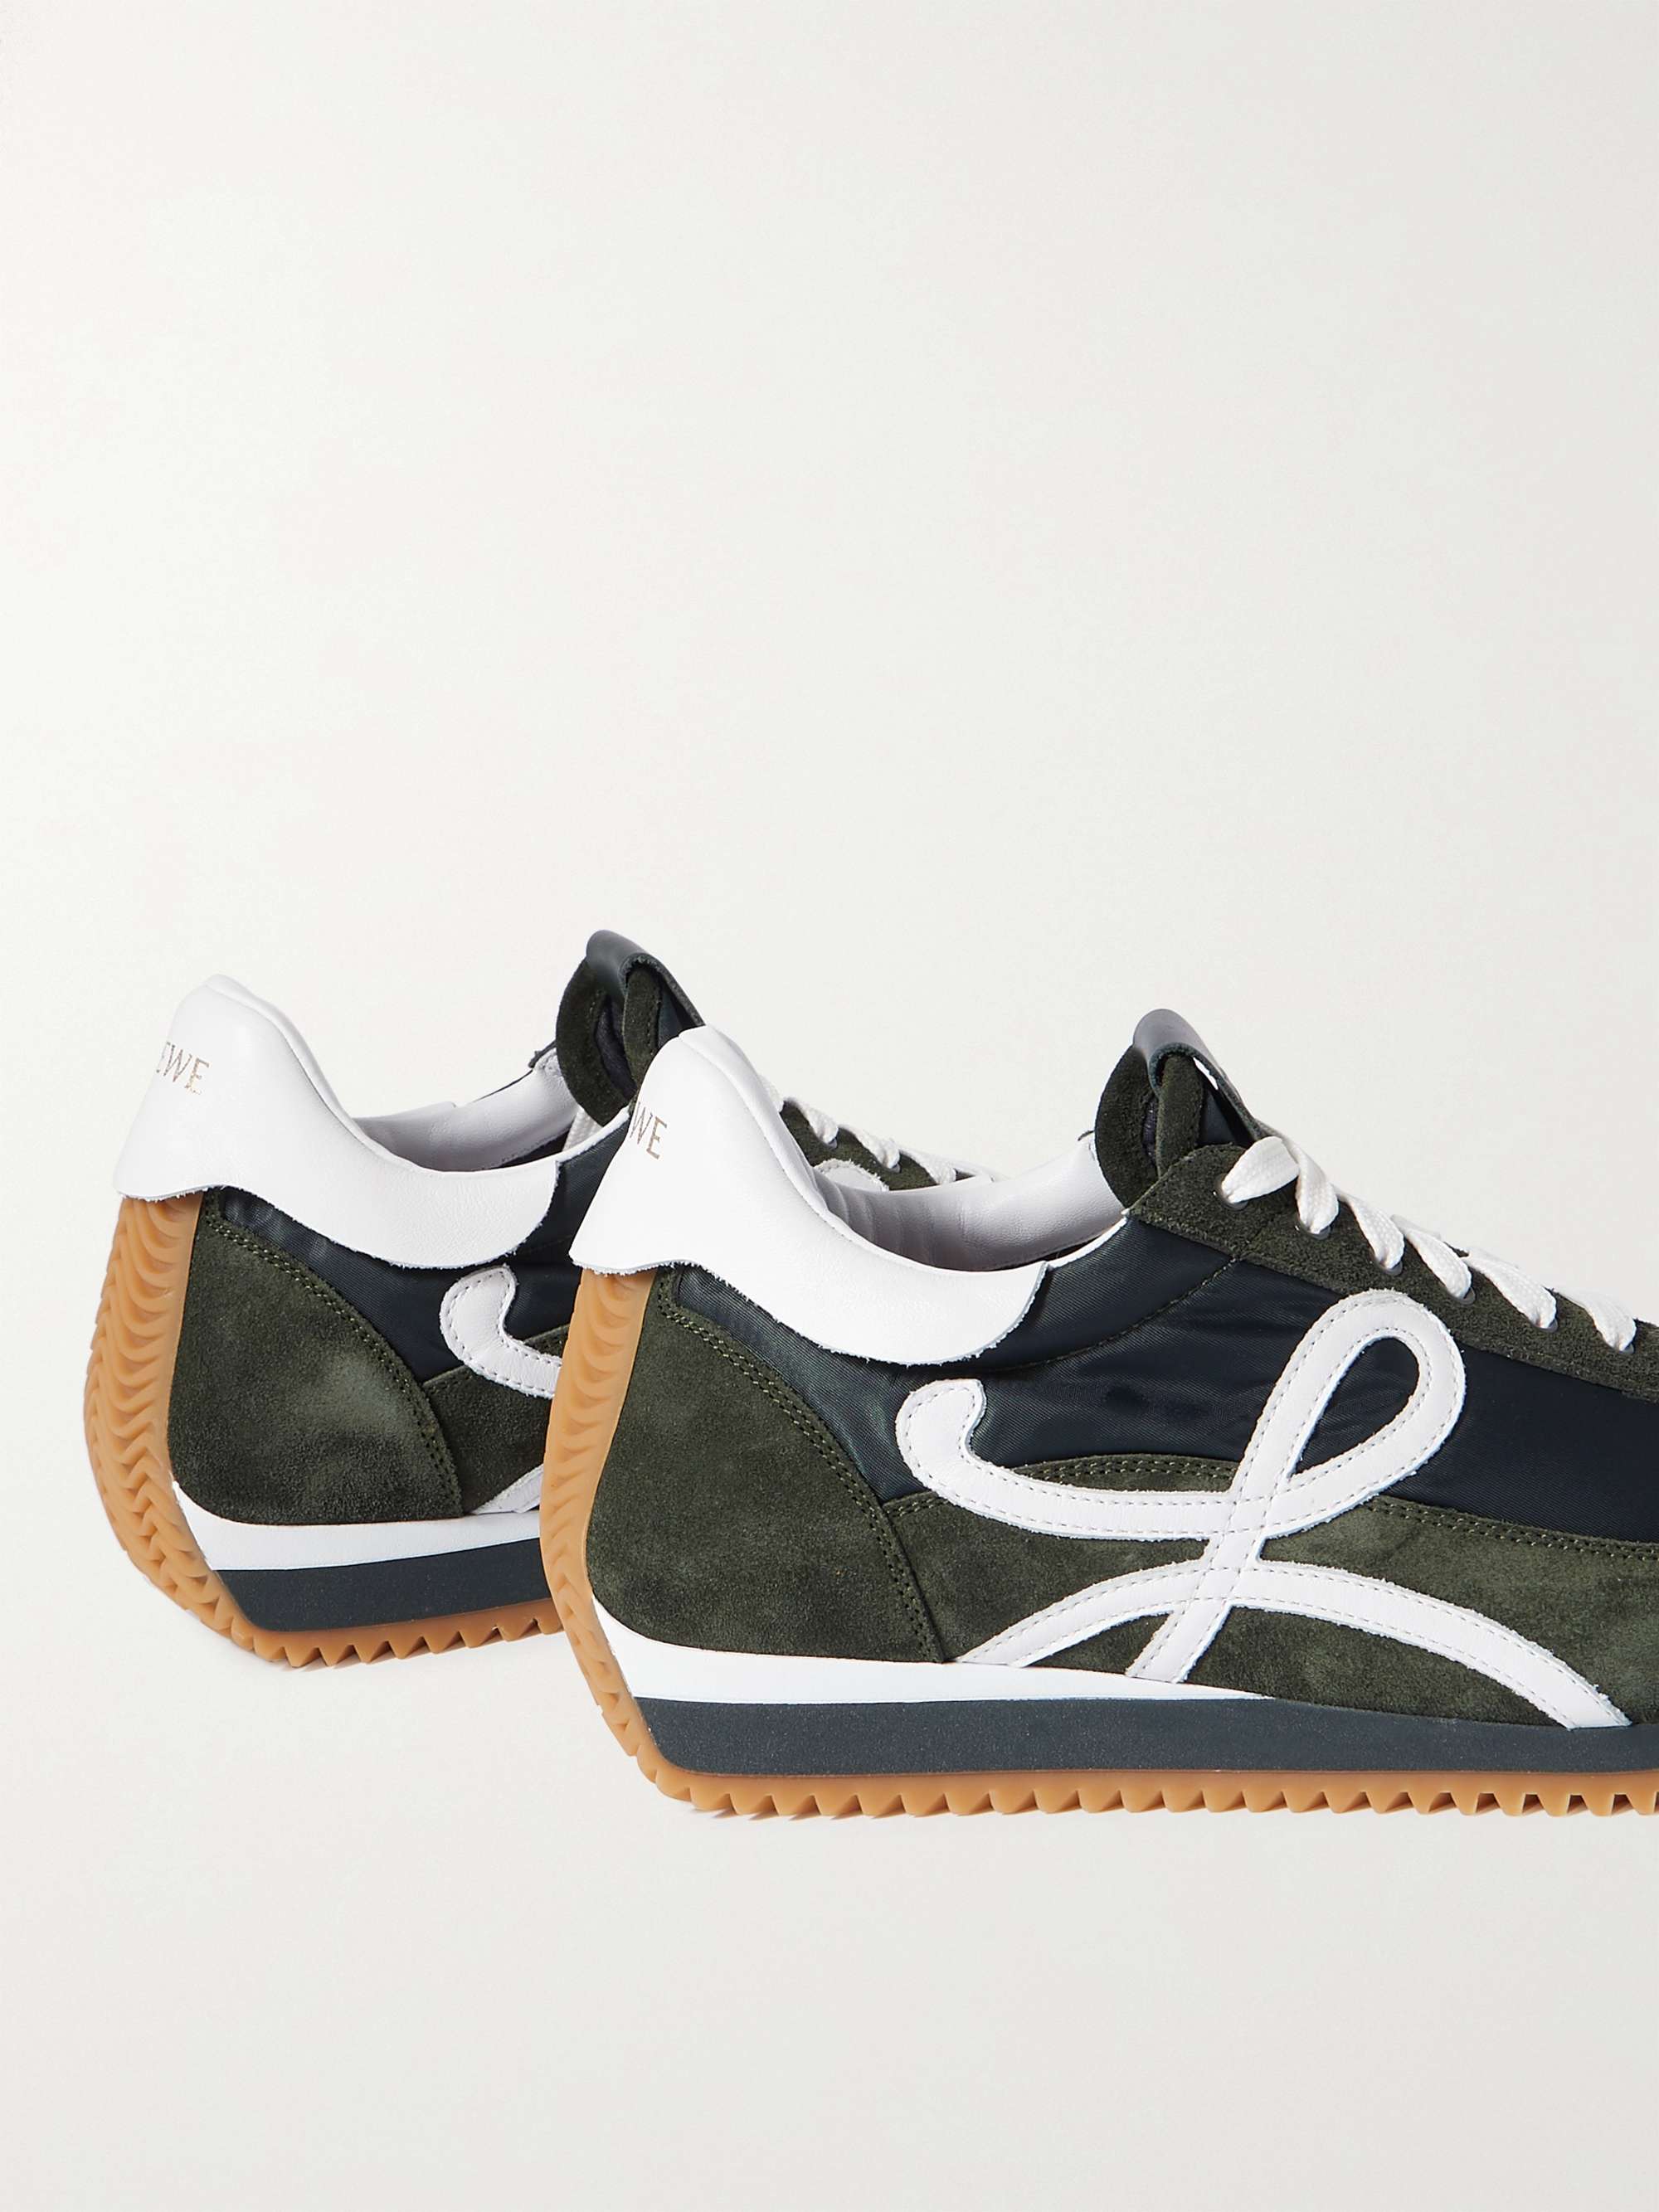 Flow Runner Leather-Trimmed Suede and Nylon Sneakers